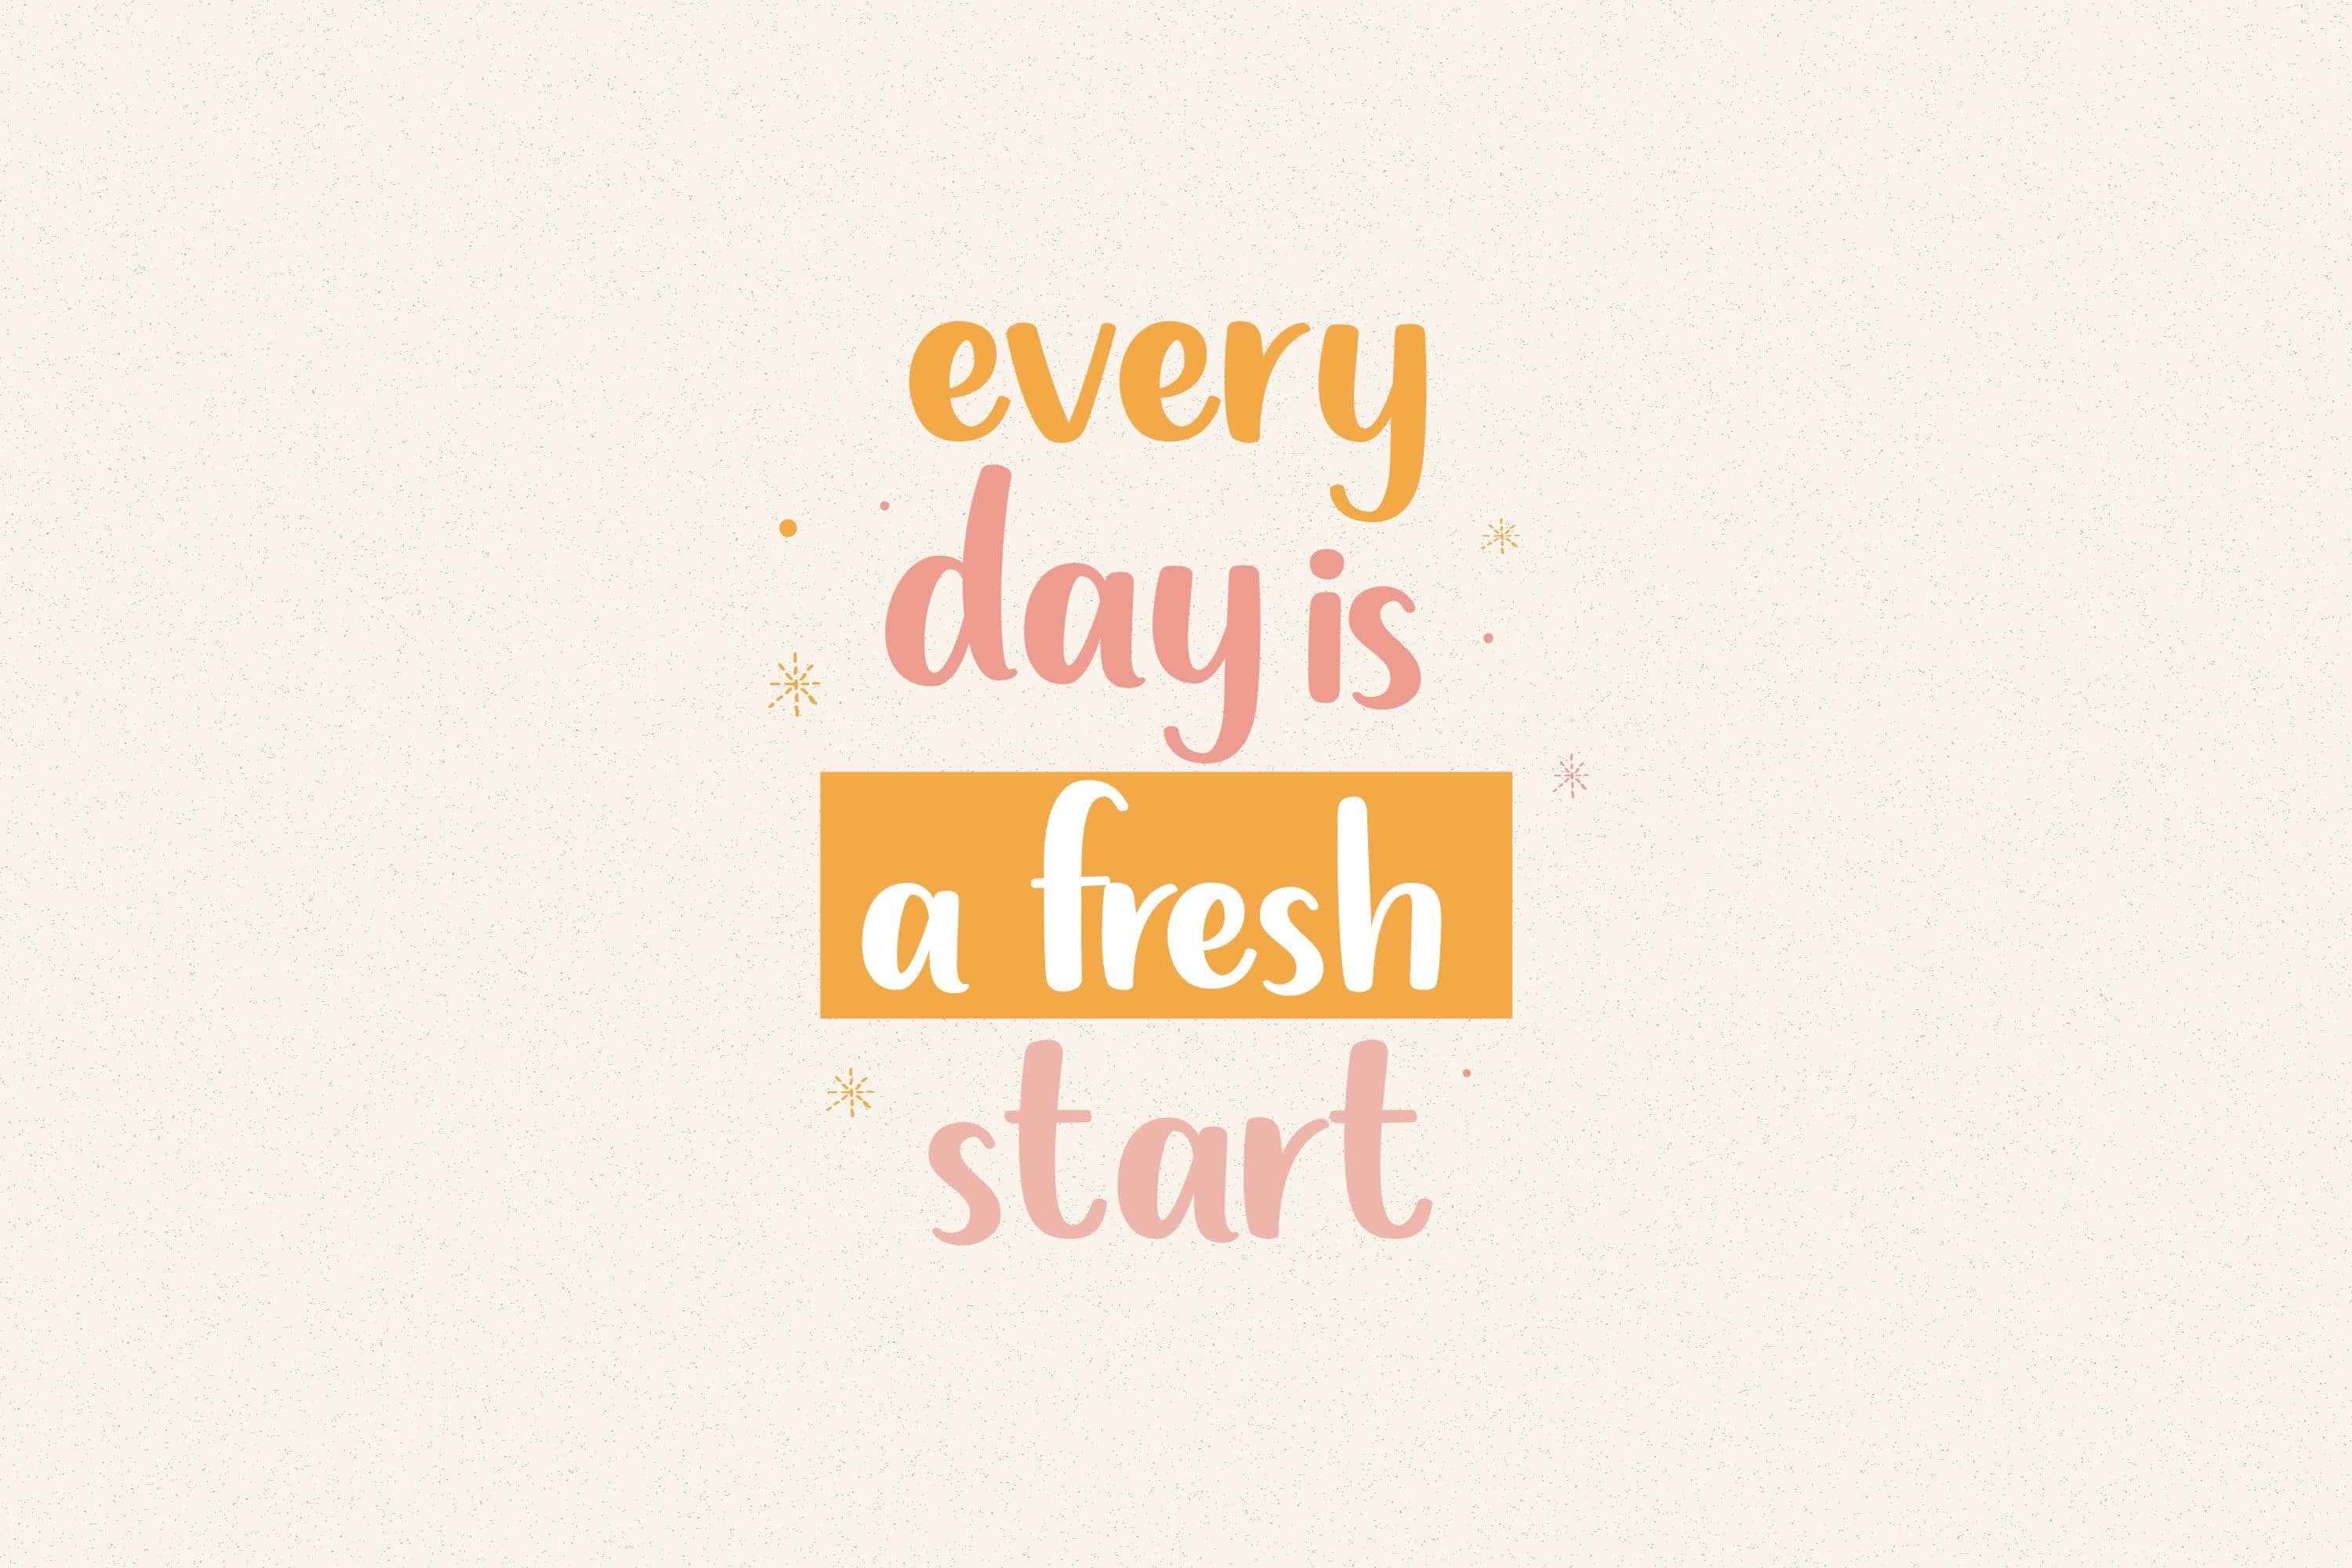 Slogan "Every day is a fresh start".